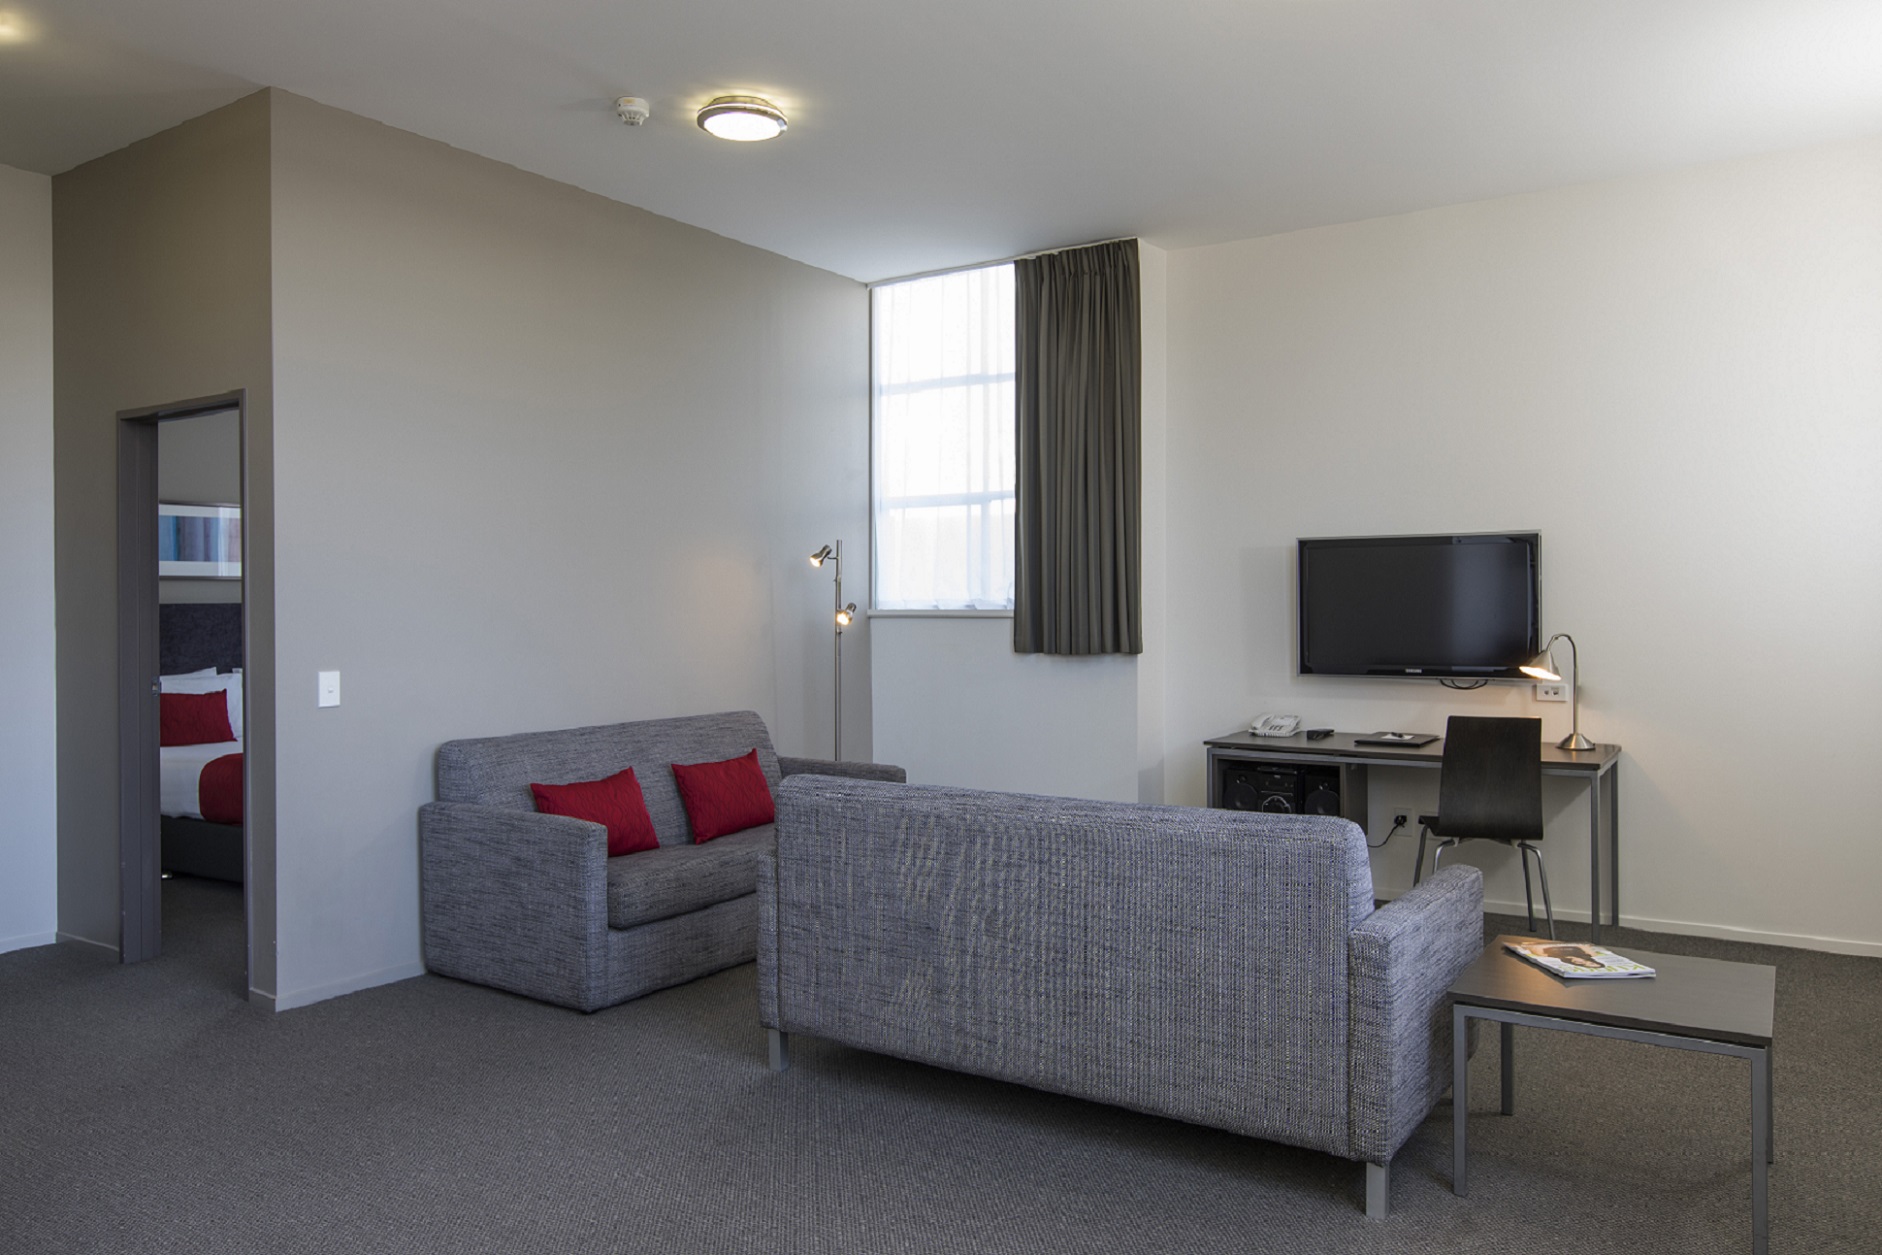 One-Night Weekend Escape to New Plymouth for Two People incl. Continental Breakfast Pack, Late Checkout & Parking - Options for Two or Three Nights Available